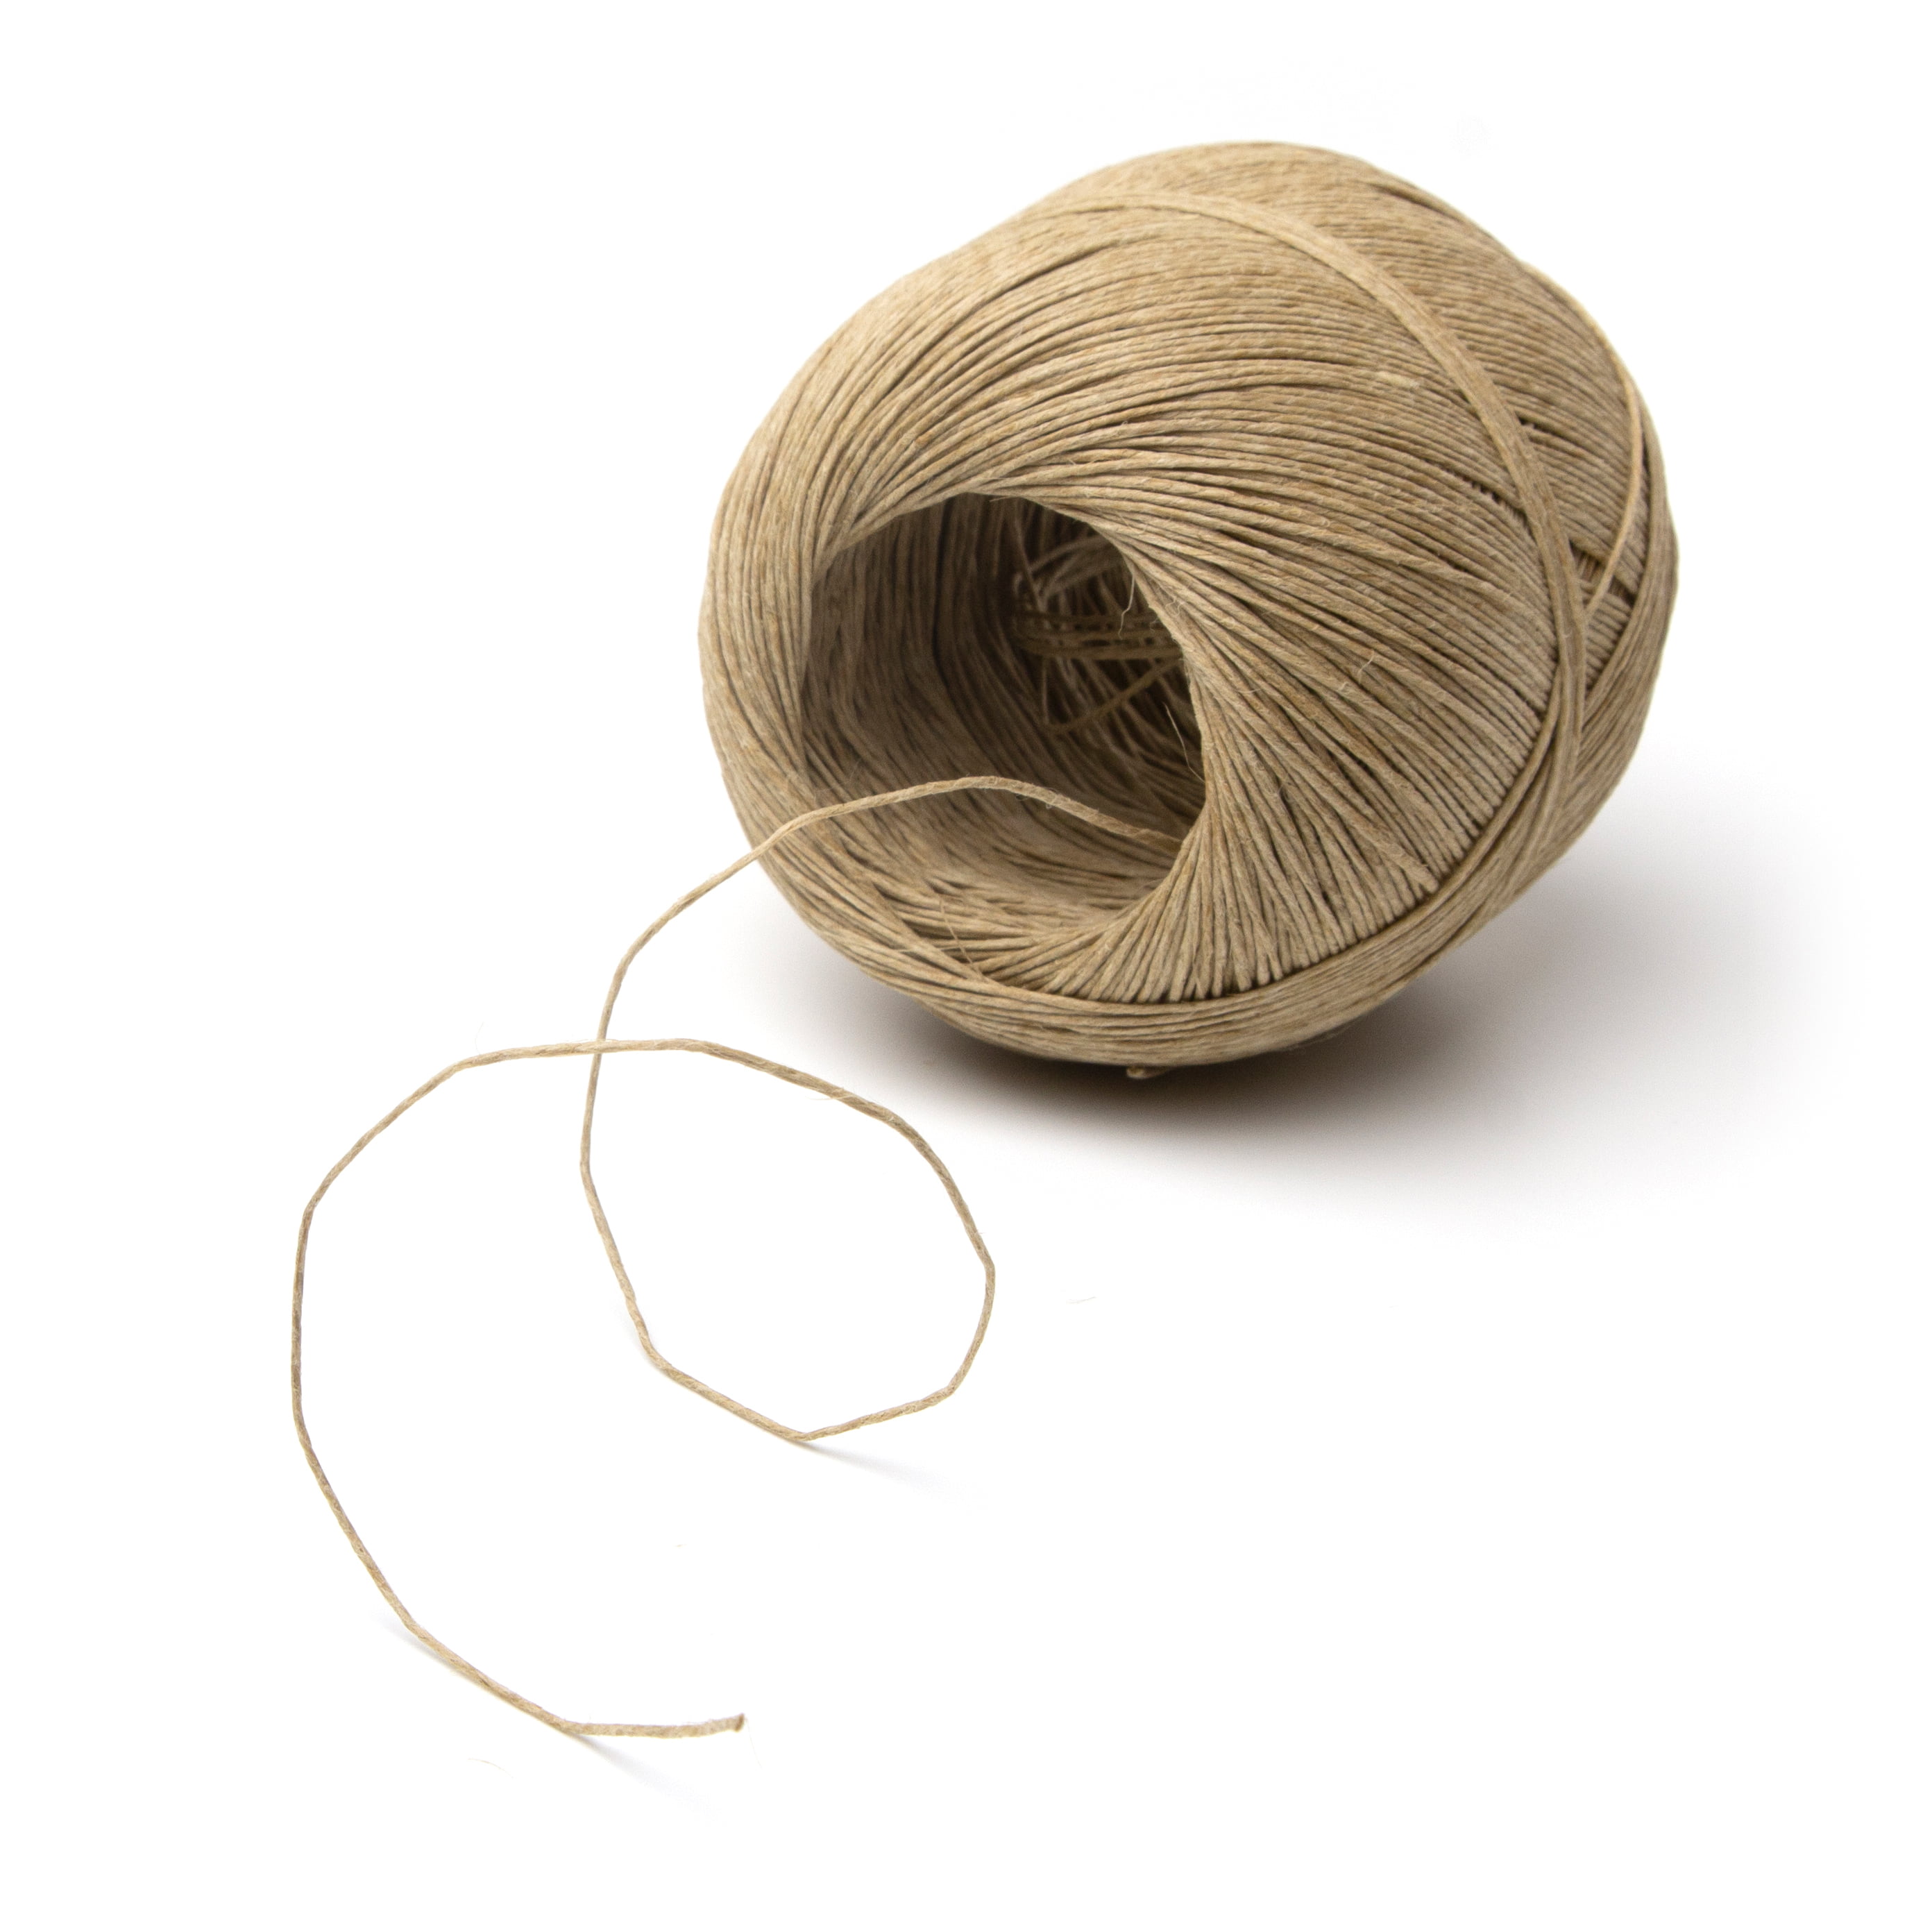 Cousin DIY Natural Polished Thick Hemp Cord Twine - 64.5 yd